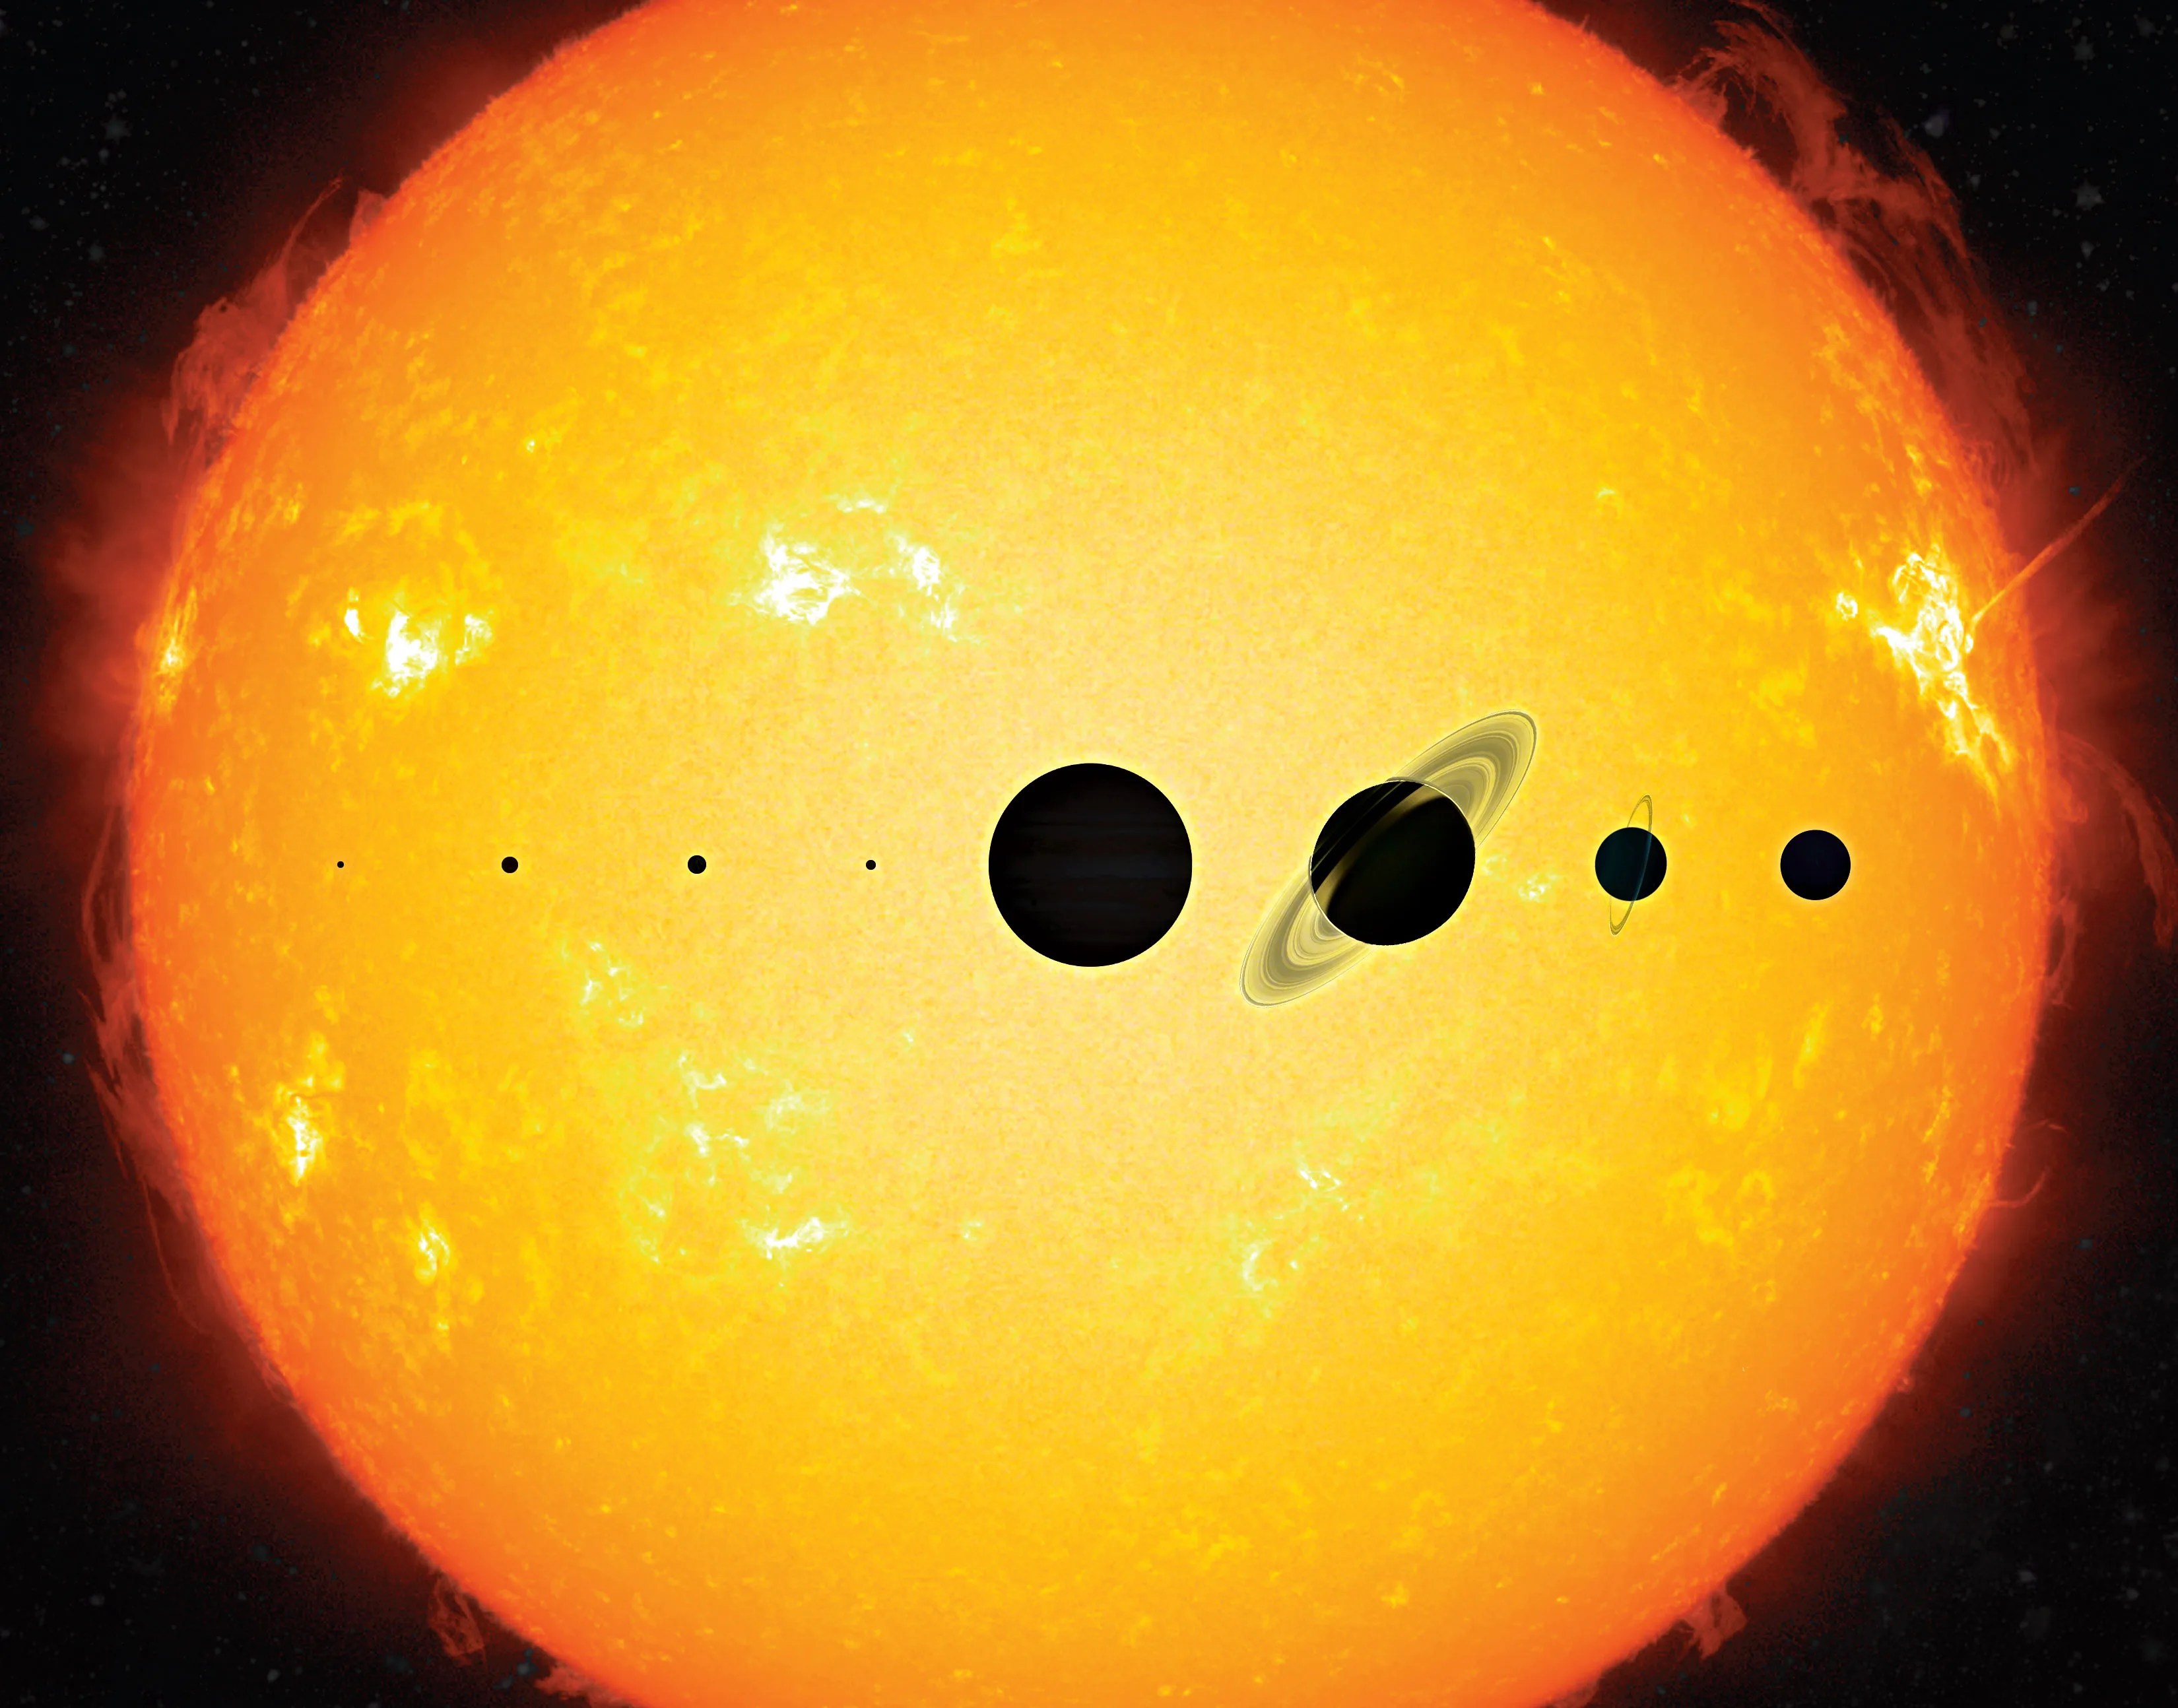 An artist's concept of the eight planets compared in size the Sun. All the planets together cover only a small fraction of the Sun.